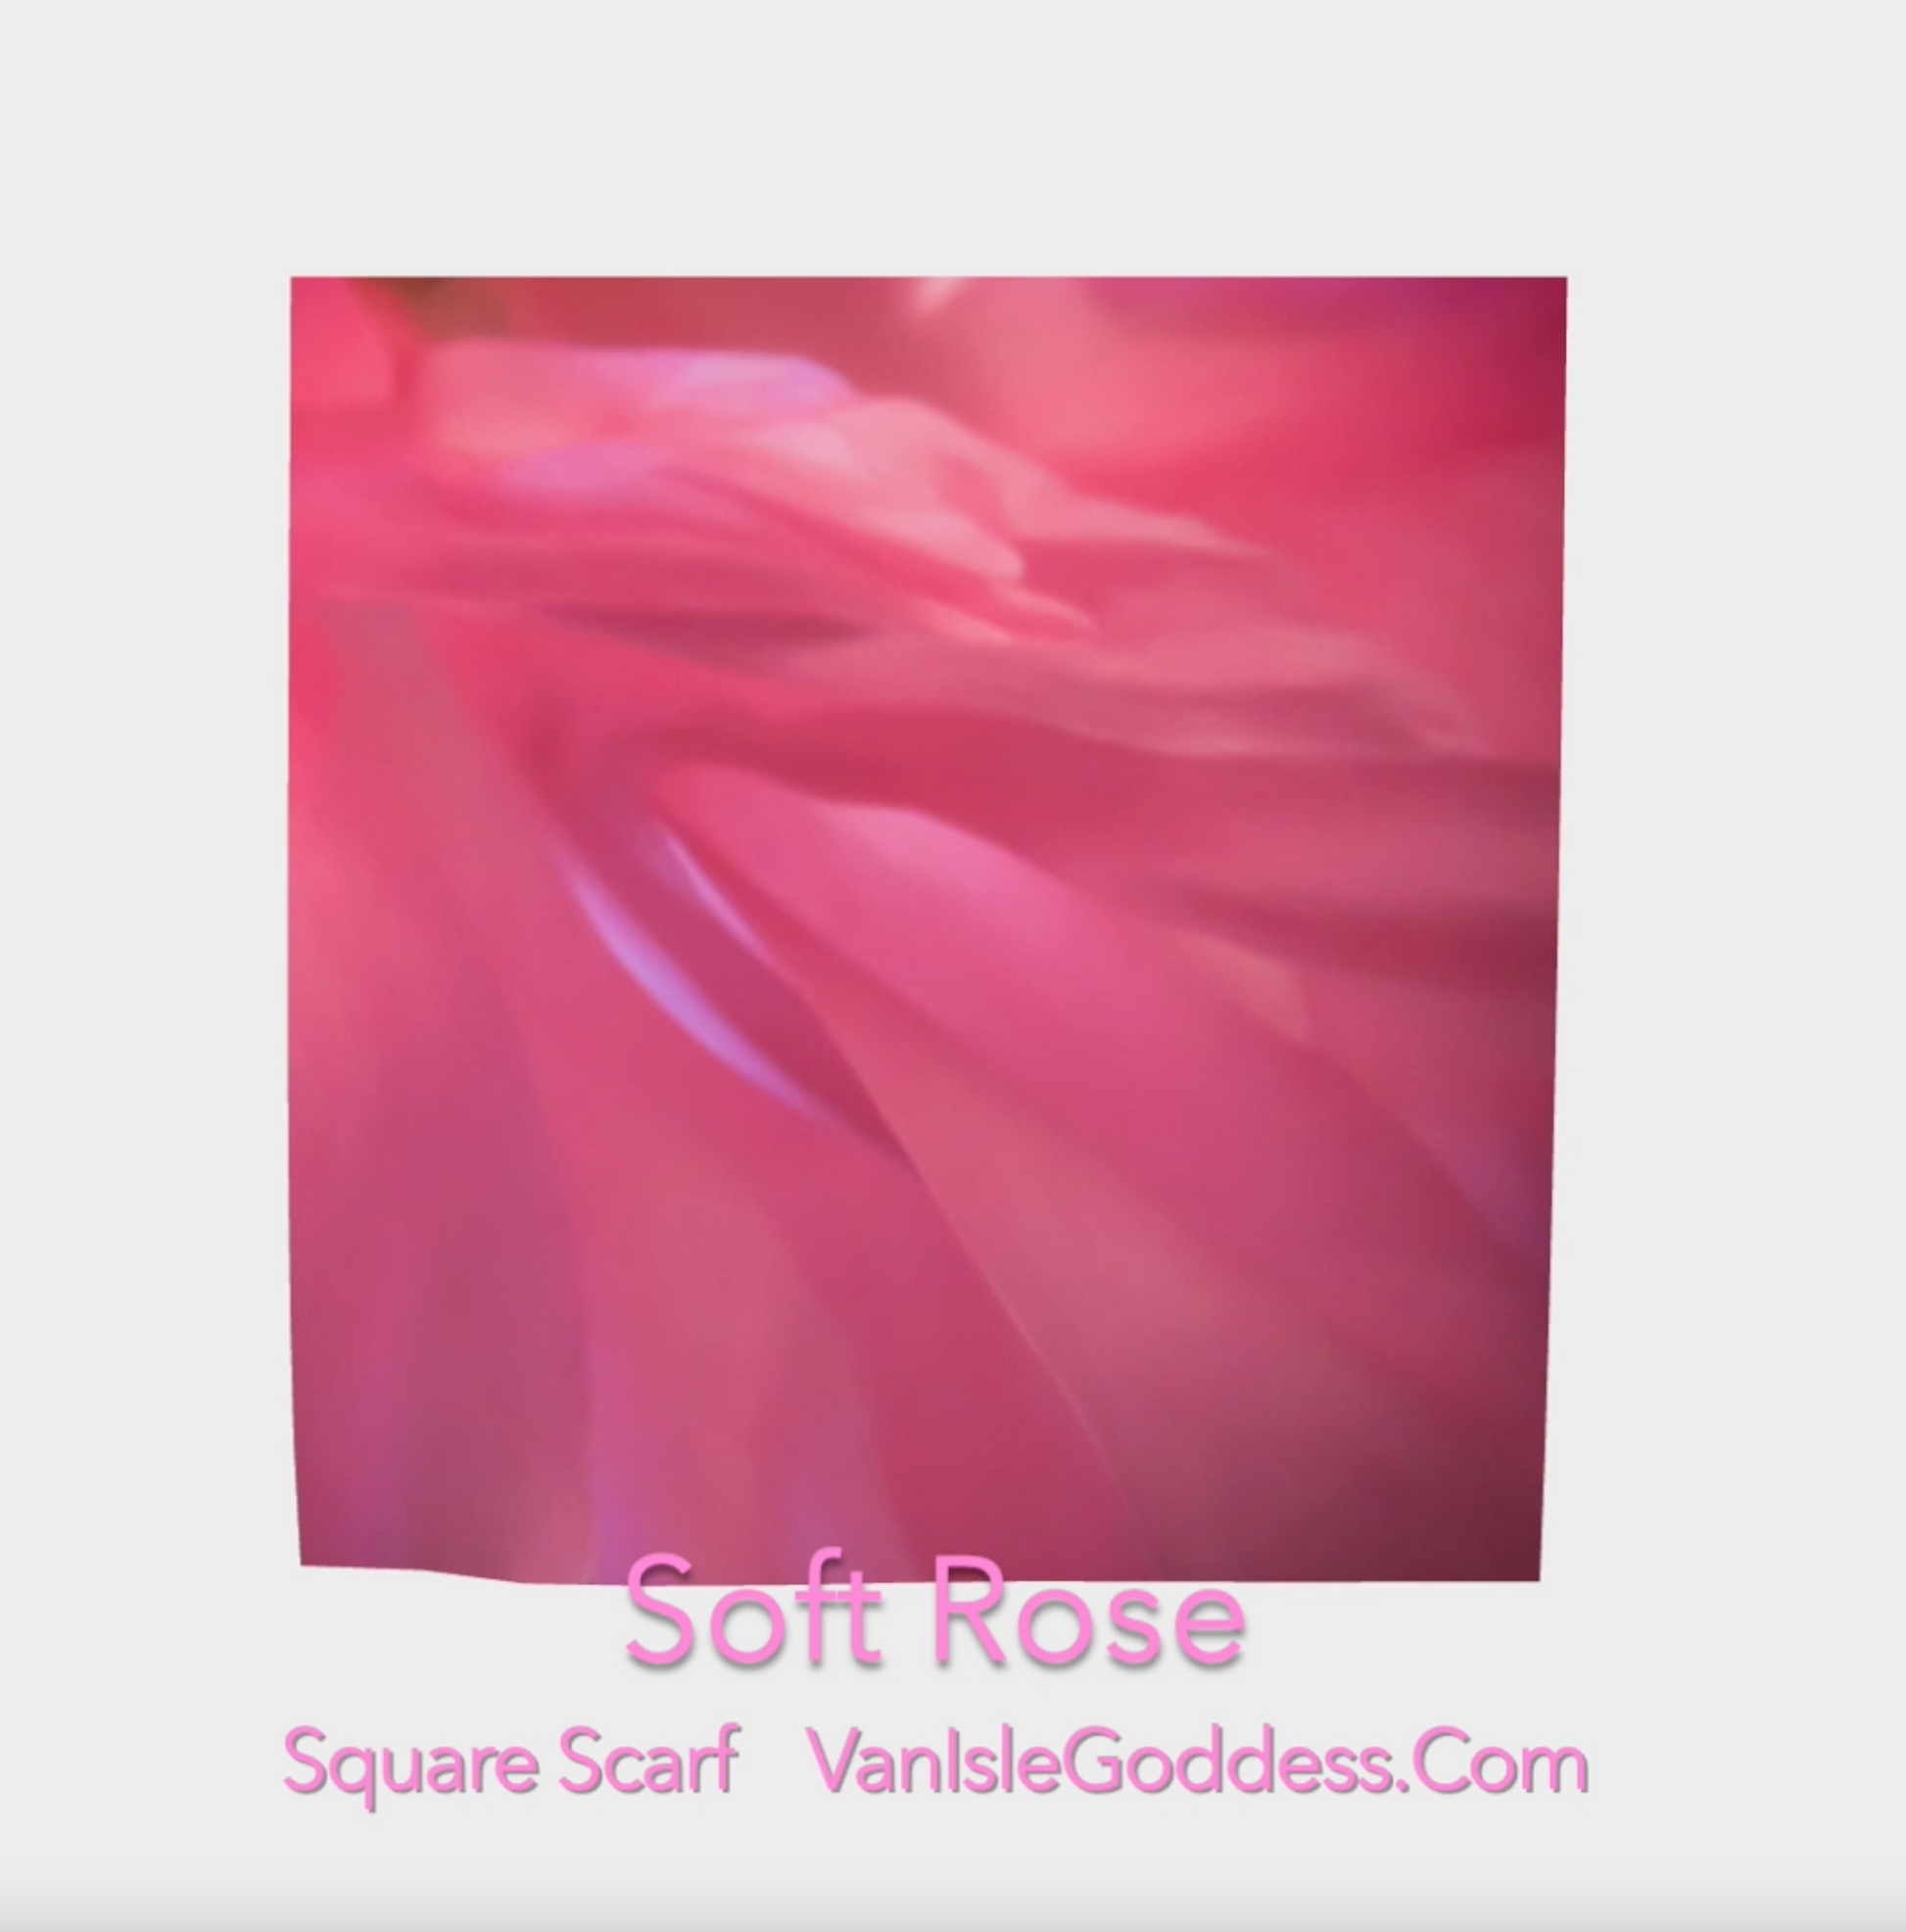 Soft Rose square scarf shown full size